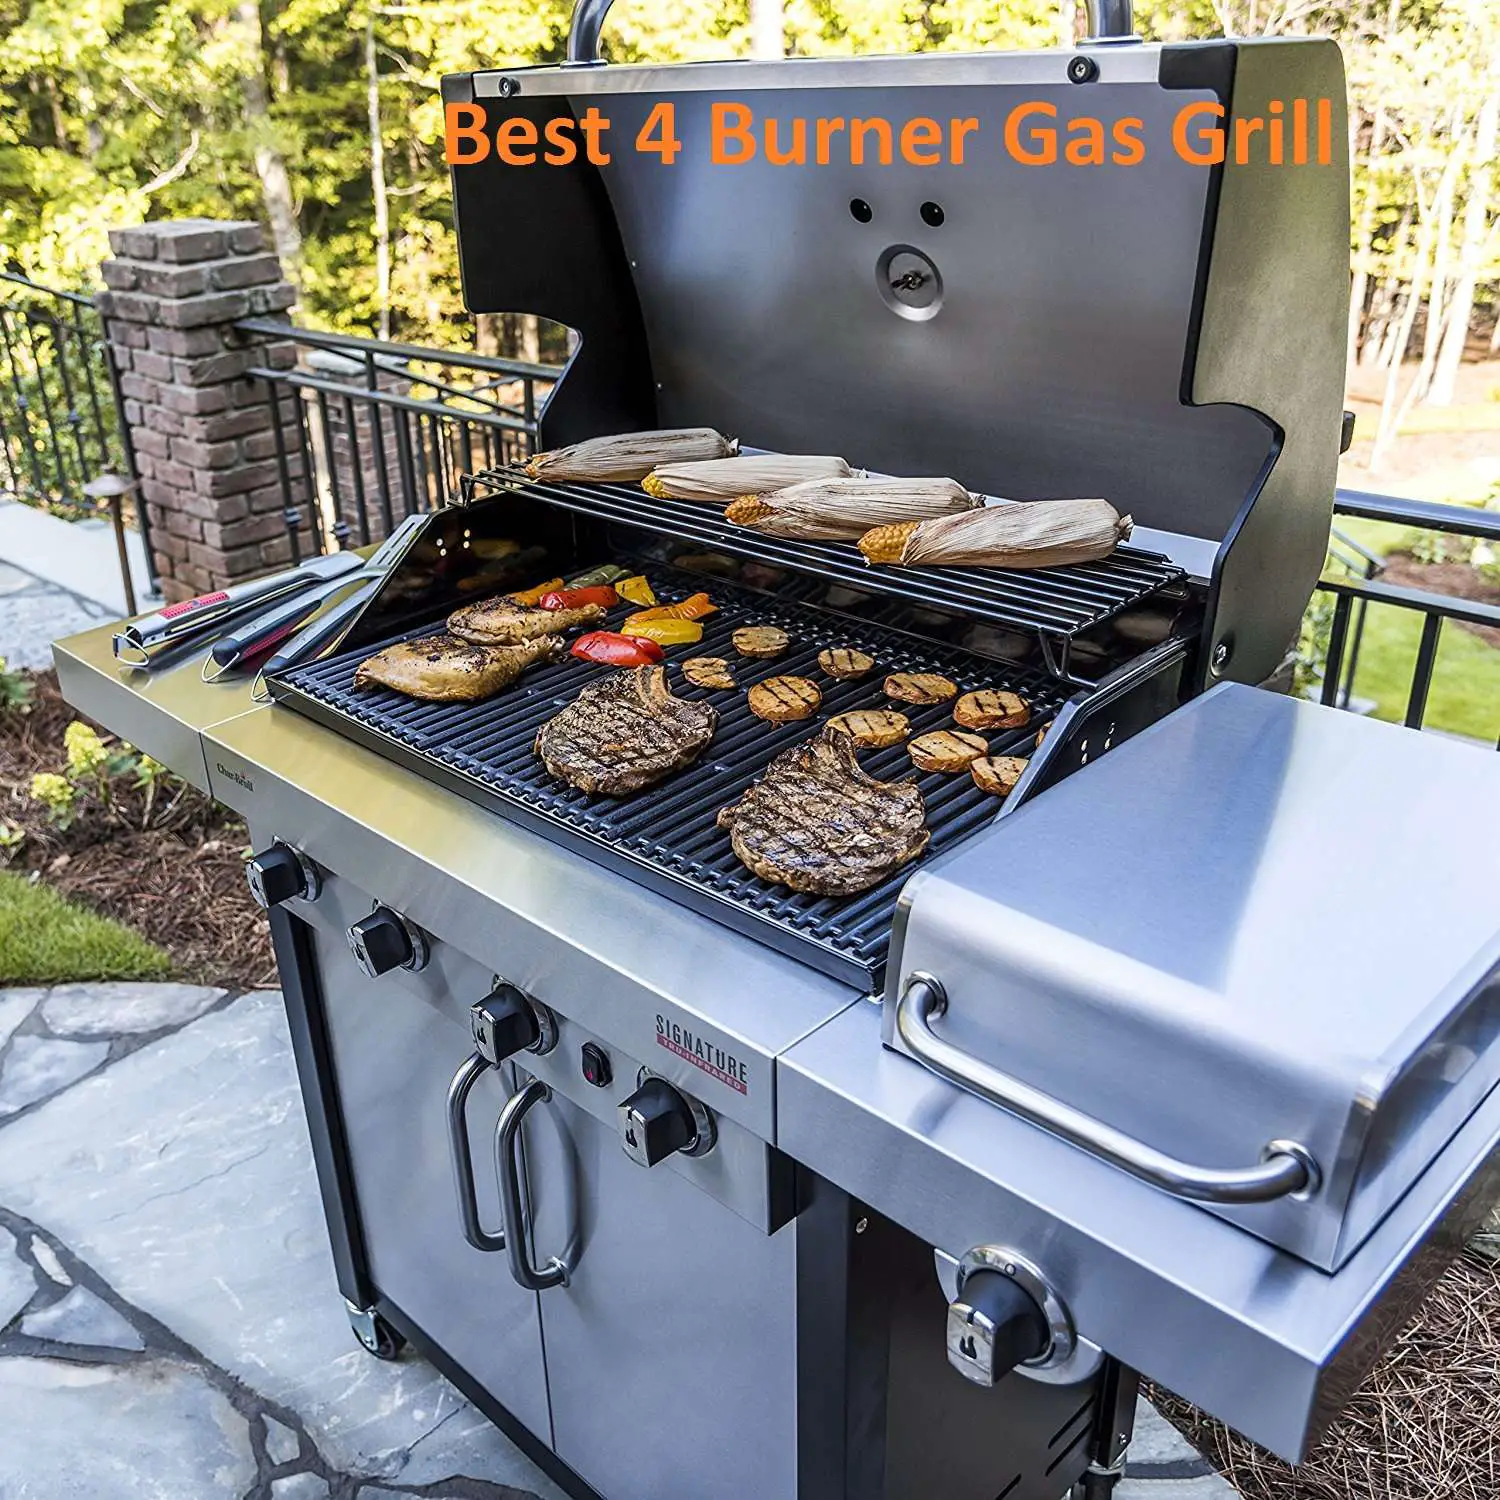 The Best 4 Burner Gas Grill Reviews for 2020 &  Guide